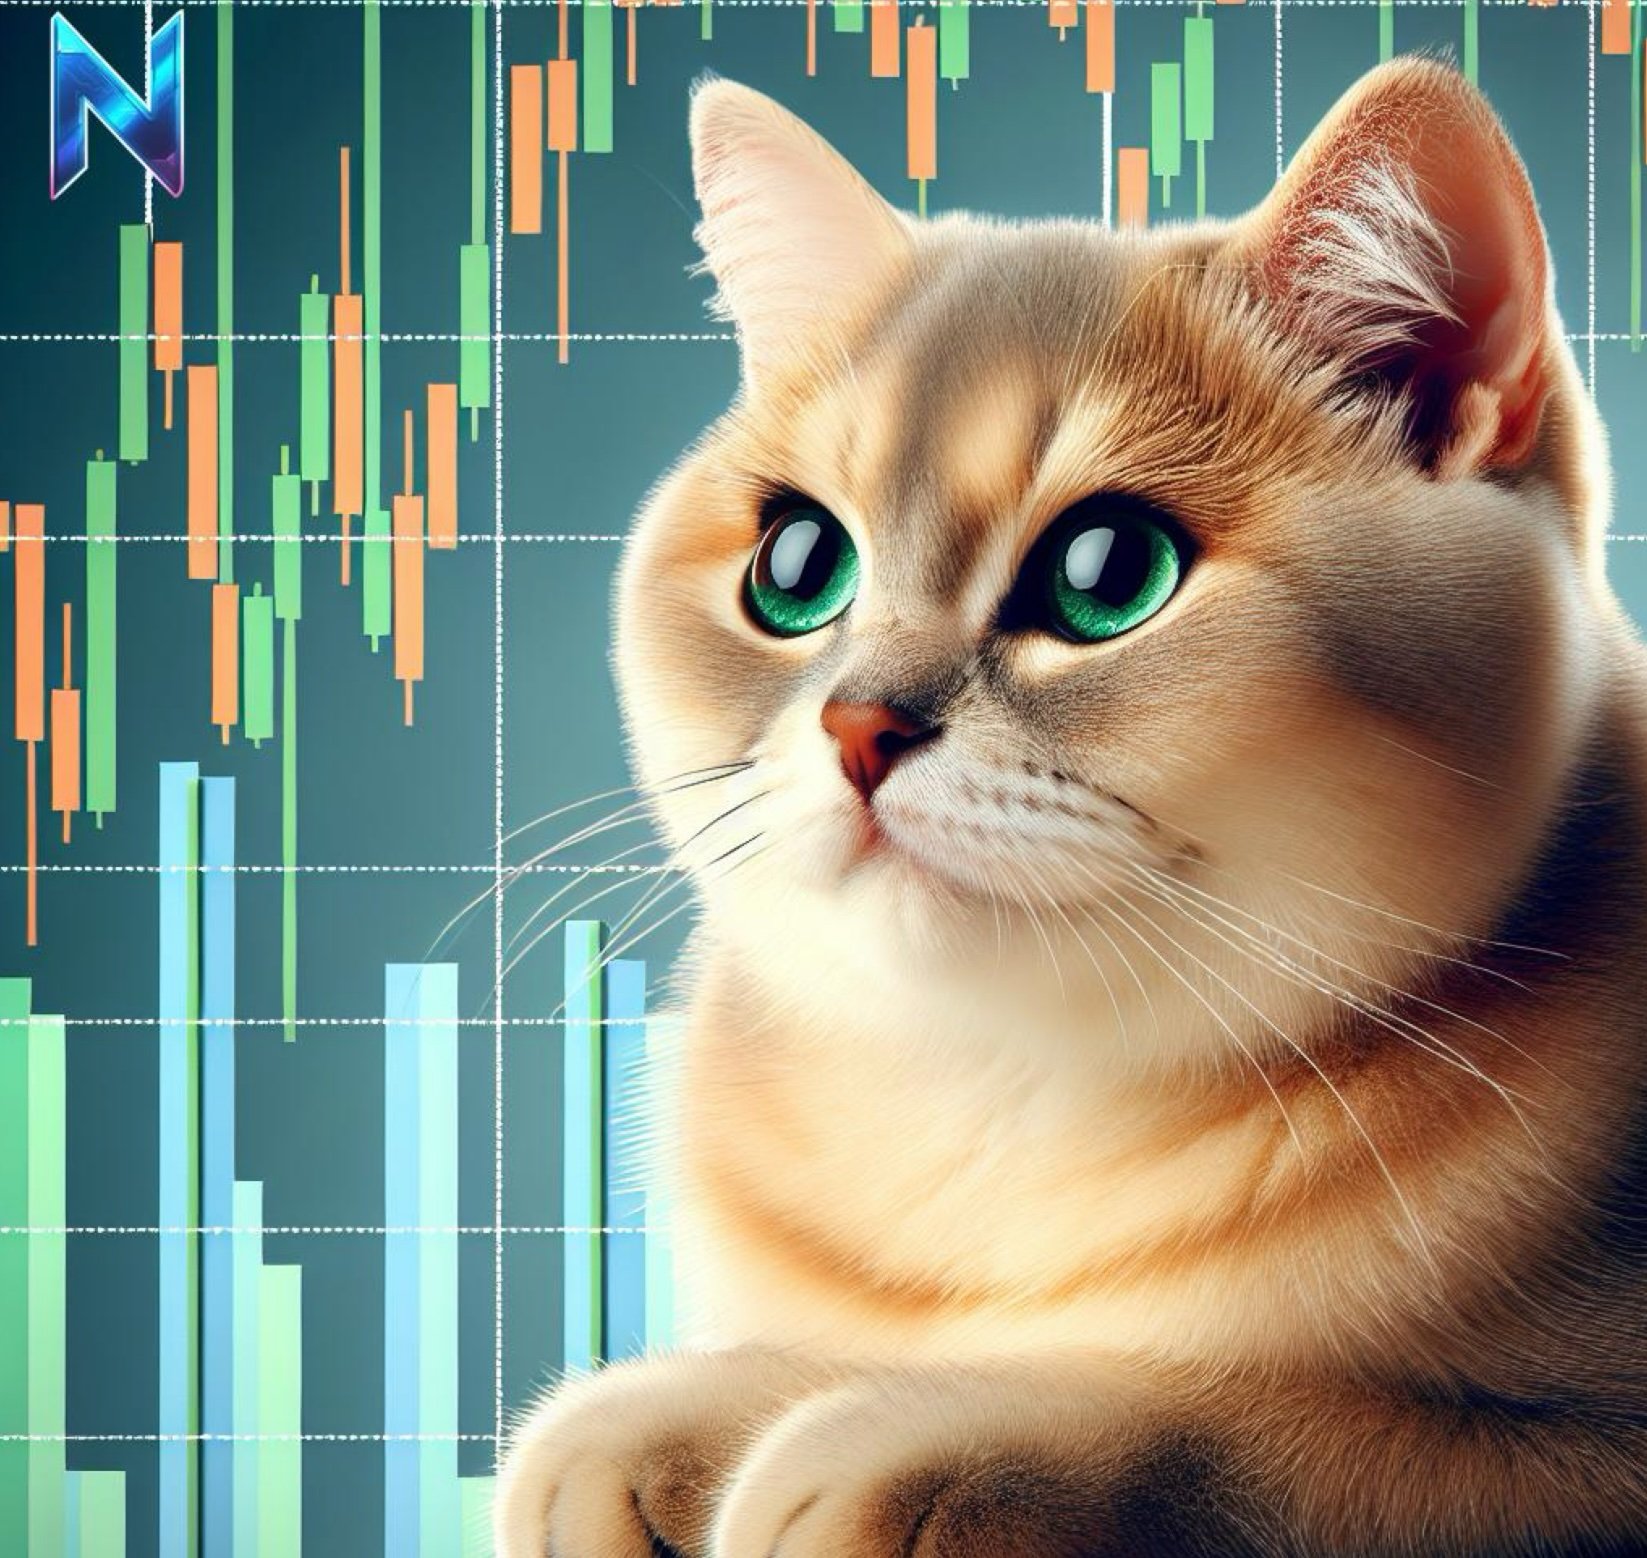 Cat coins such as Popcat and Shark Cat are exploding on Solana meme coin markets but are Sloths making a comeback for the throne?